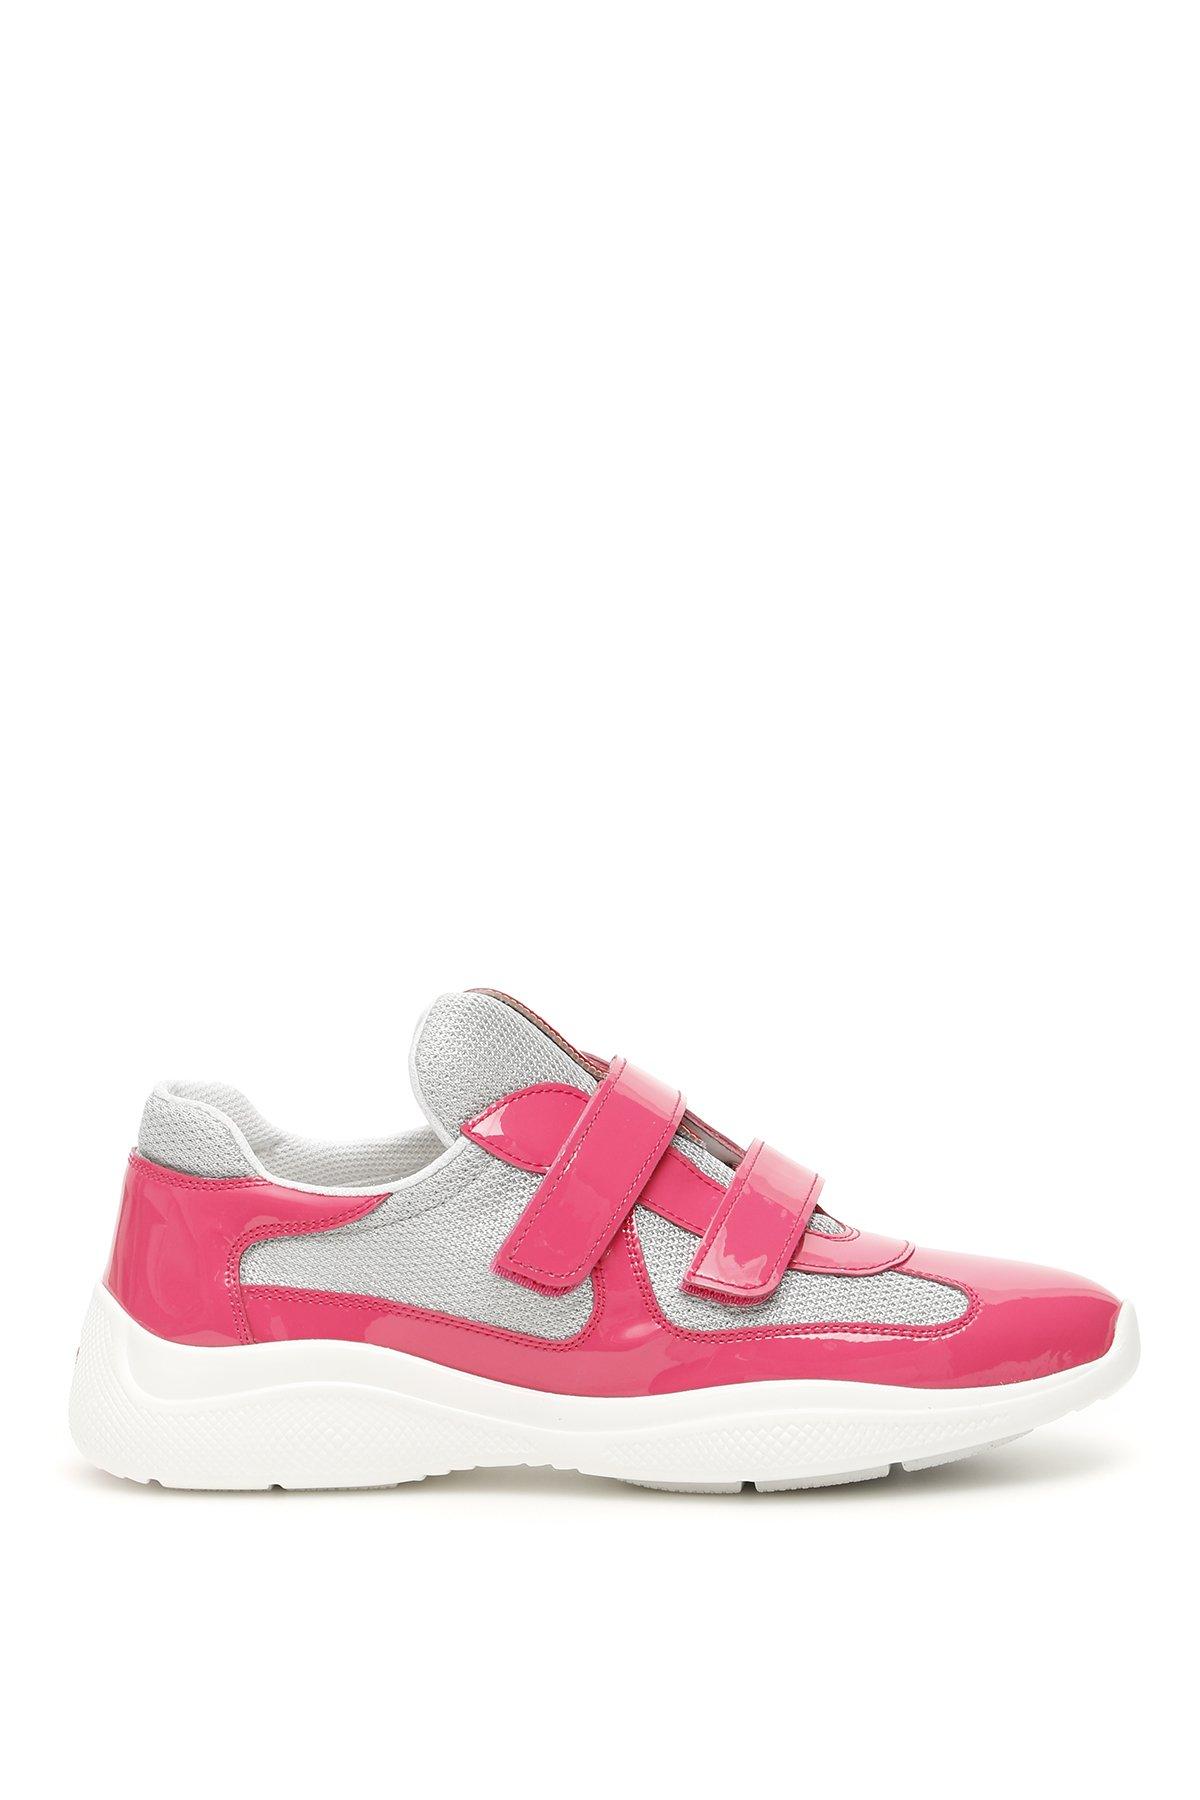 Æble Calibre Perseus Prada Velcro Strap Contrasting Panelled Sneakers in Pink | Lyst